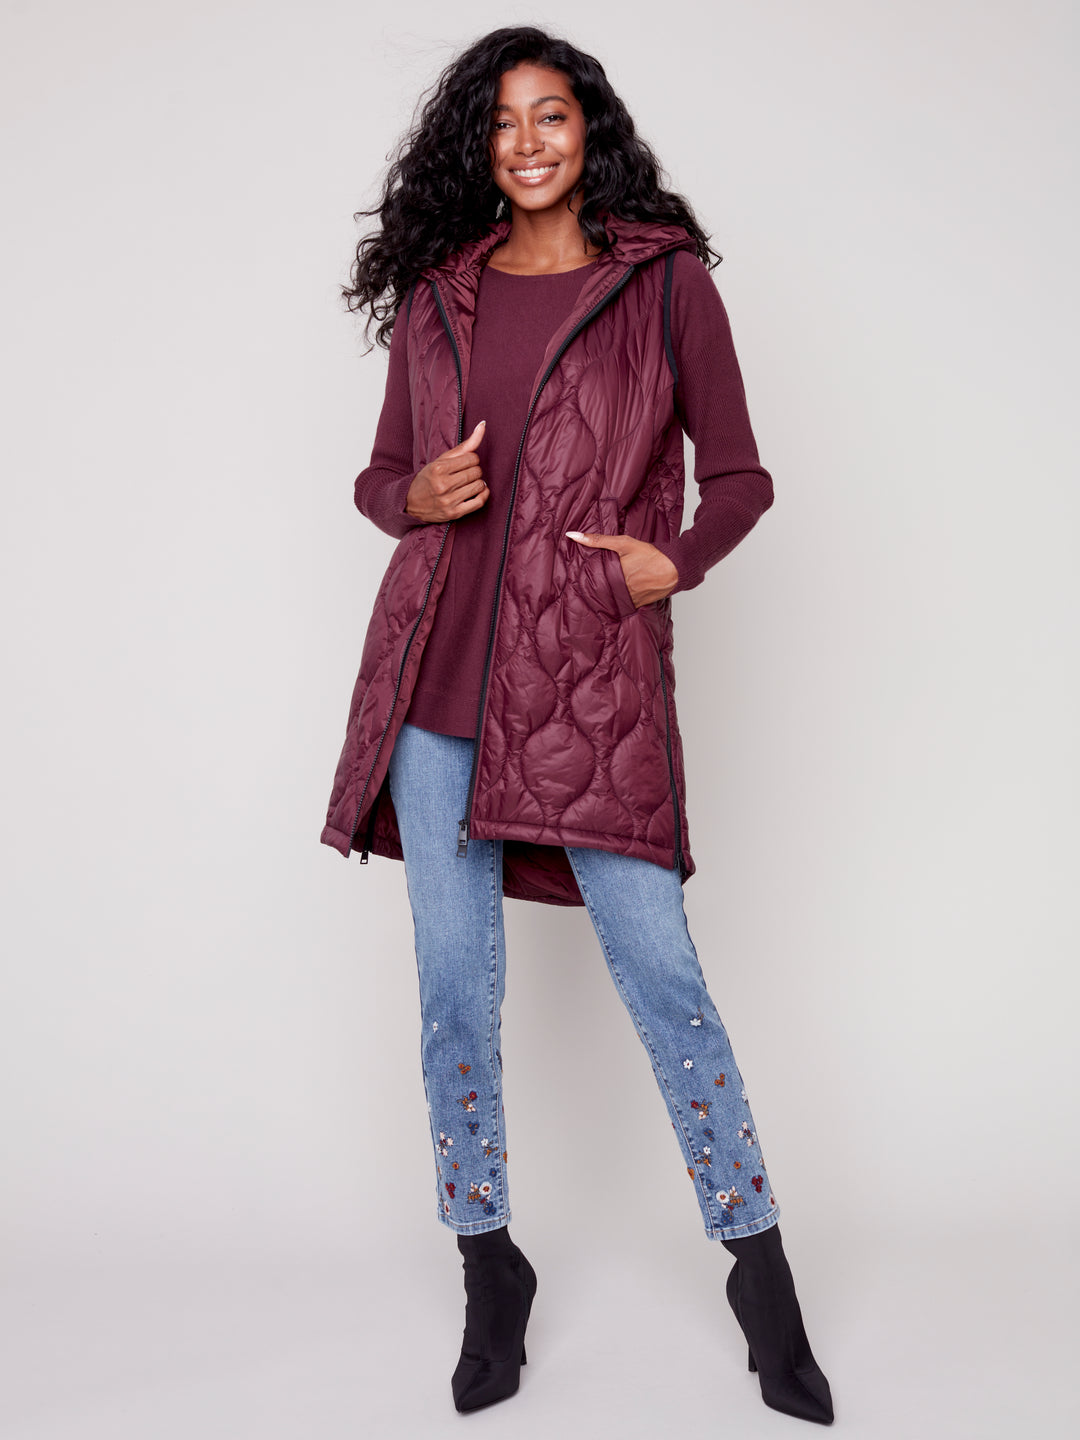 Hooded Quilted Puffer Vest